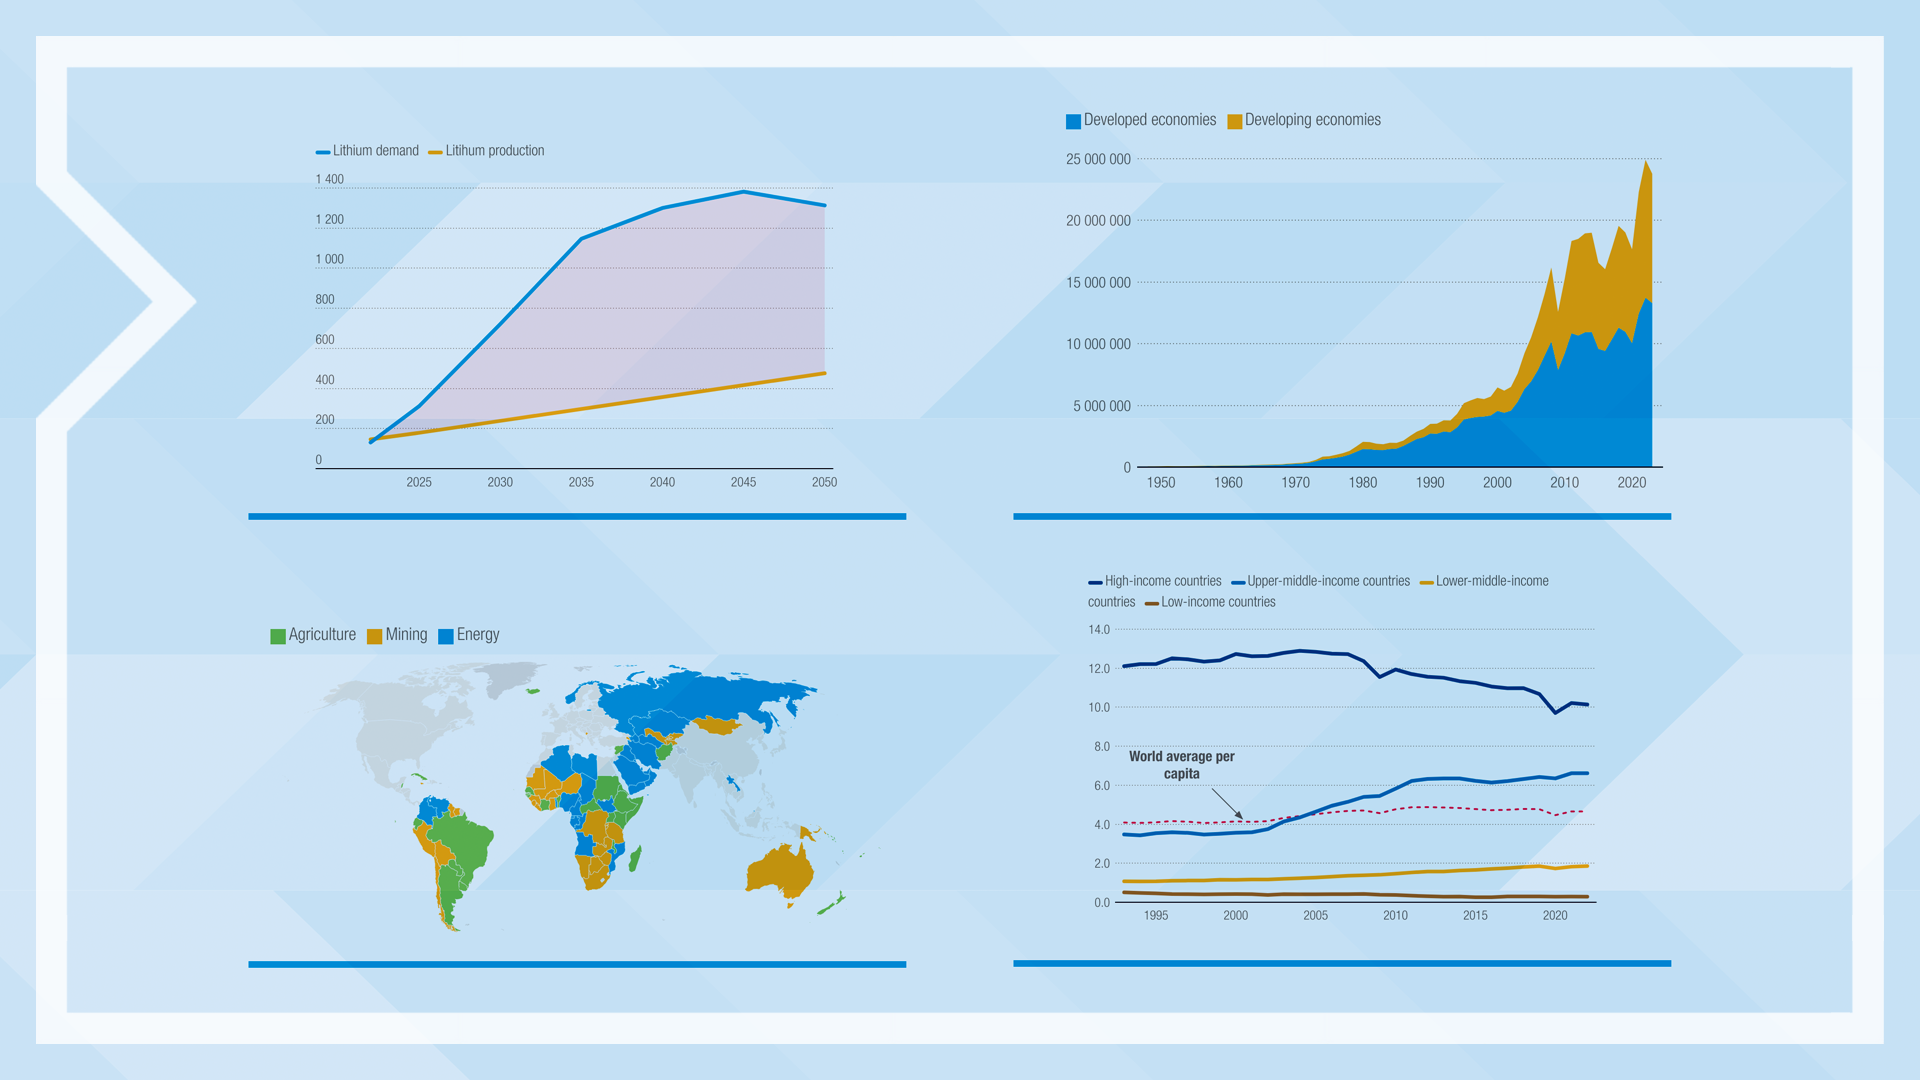 Explore the graphs and trends